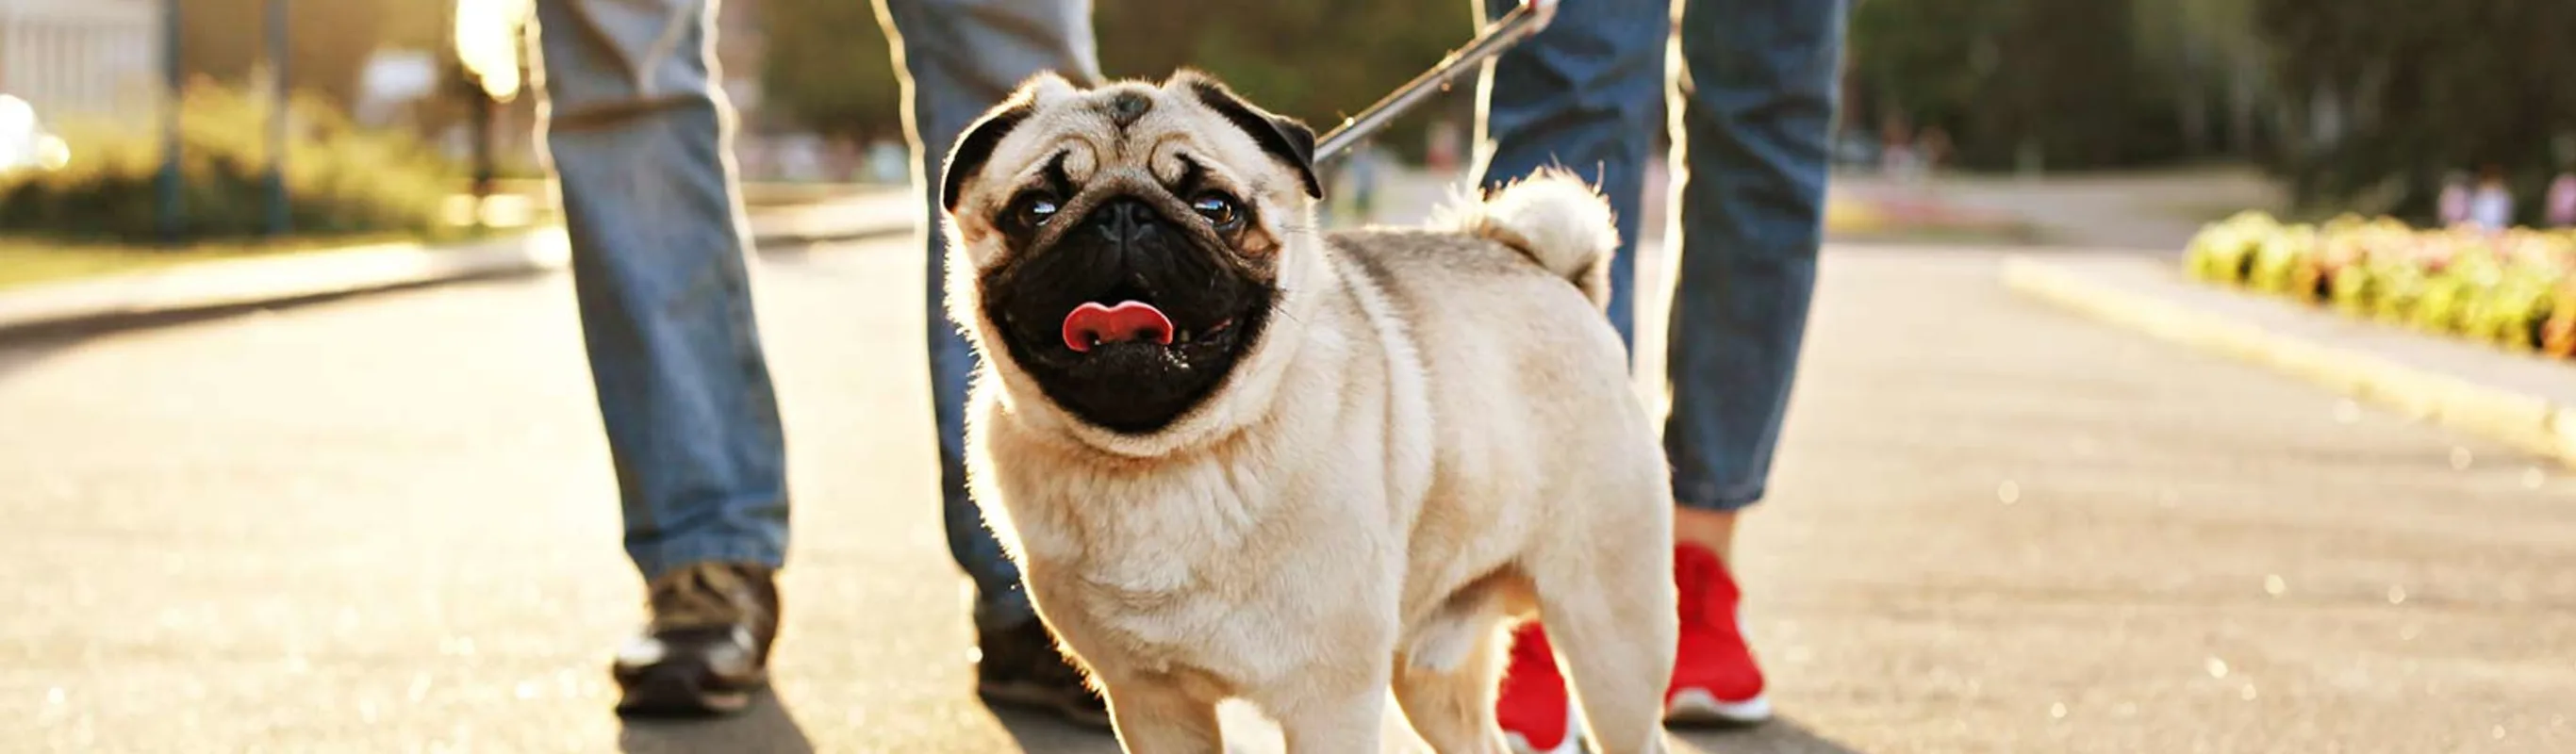 pug being walked by owners